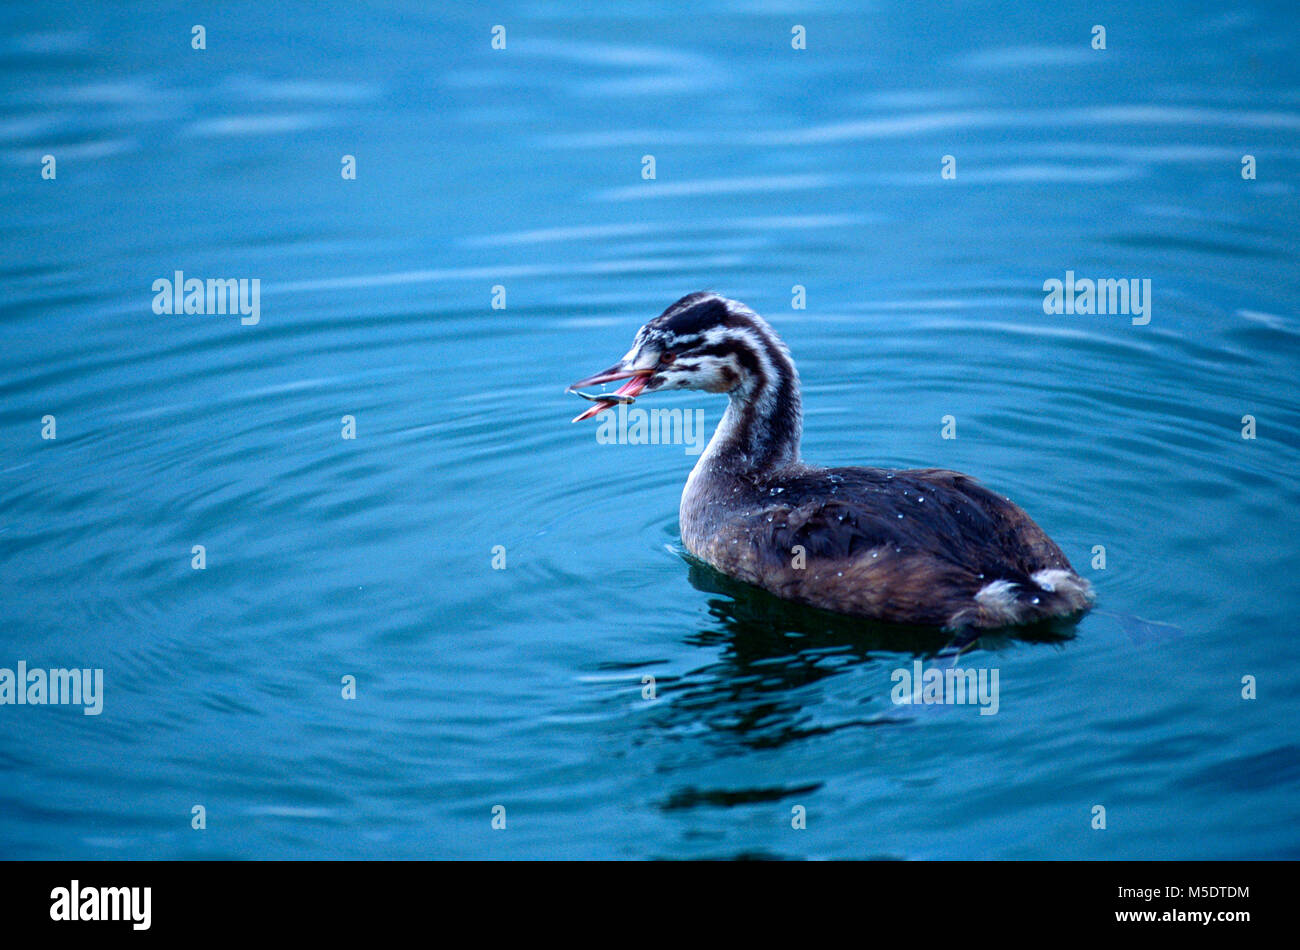 Great Crested Grebe, Podiceps cristatus, Podicepididae, Grebe, with fish, bird, animal, Rapperswil, Lake of Zurich, Canton of St. Gallen, Switzerland Stock Photo